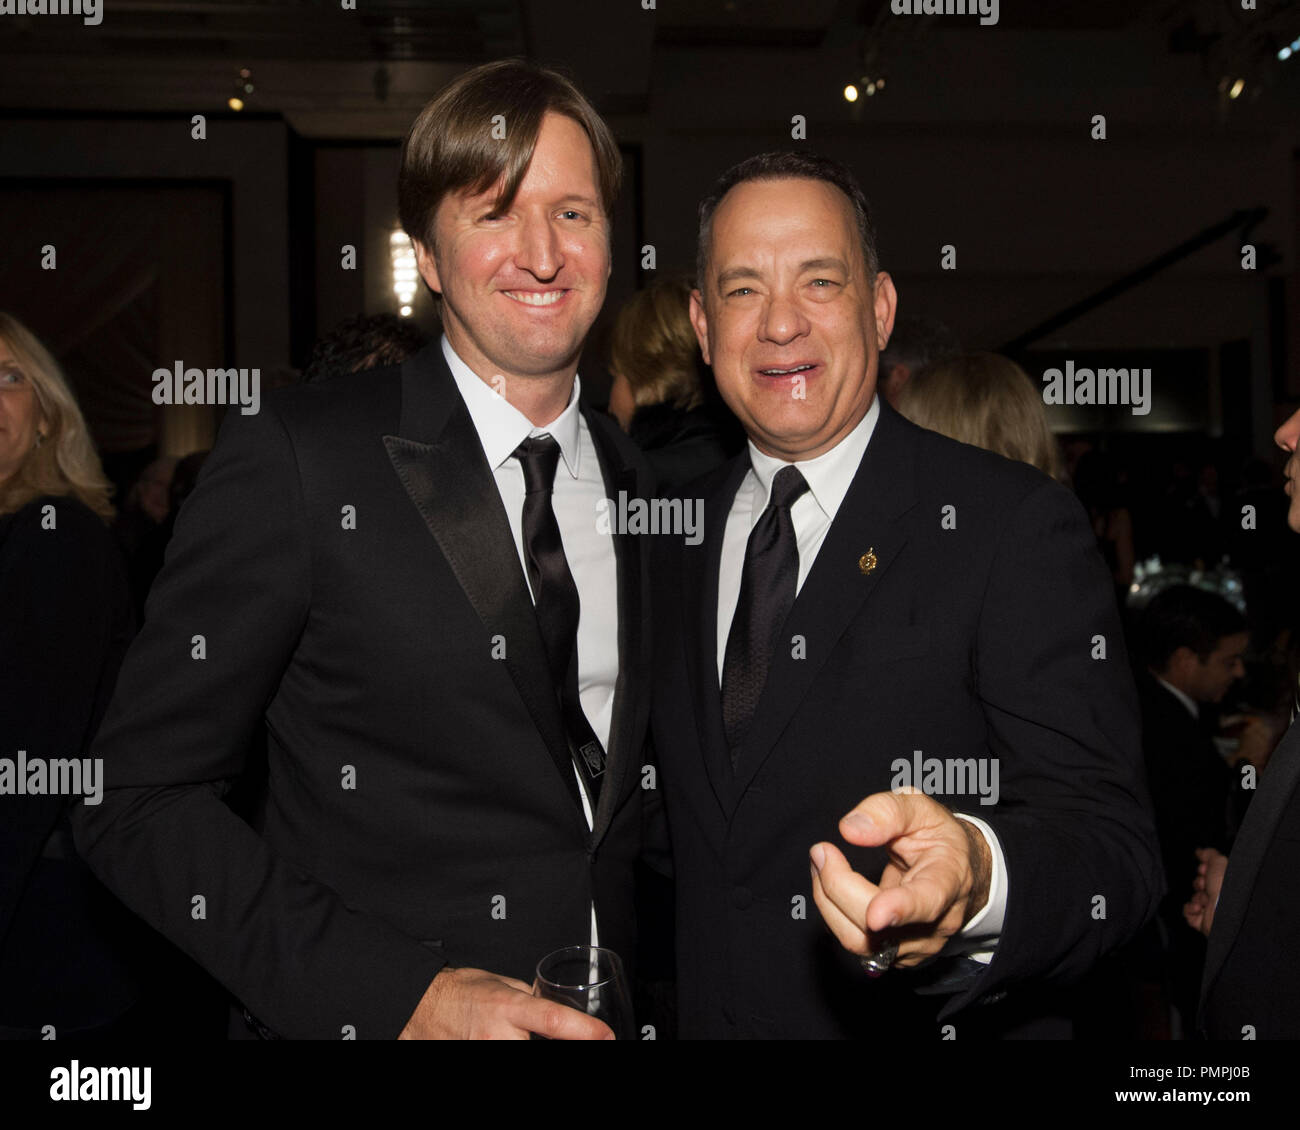 Oscar®-winning director Tom Hooper (left) and Oscar-winning actor Tom Hanks attend the 2012 Governors Awards at The Ray Dolby Ballroom at Hollywood & Highland Center® in Hollywood, CA, Saturday, December 1.  File Reference # 31744 050  For Editorial Use Only -  All Rights Reserved Stock Photo